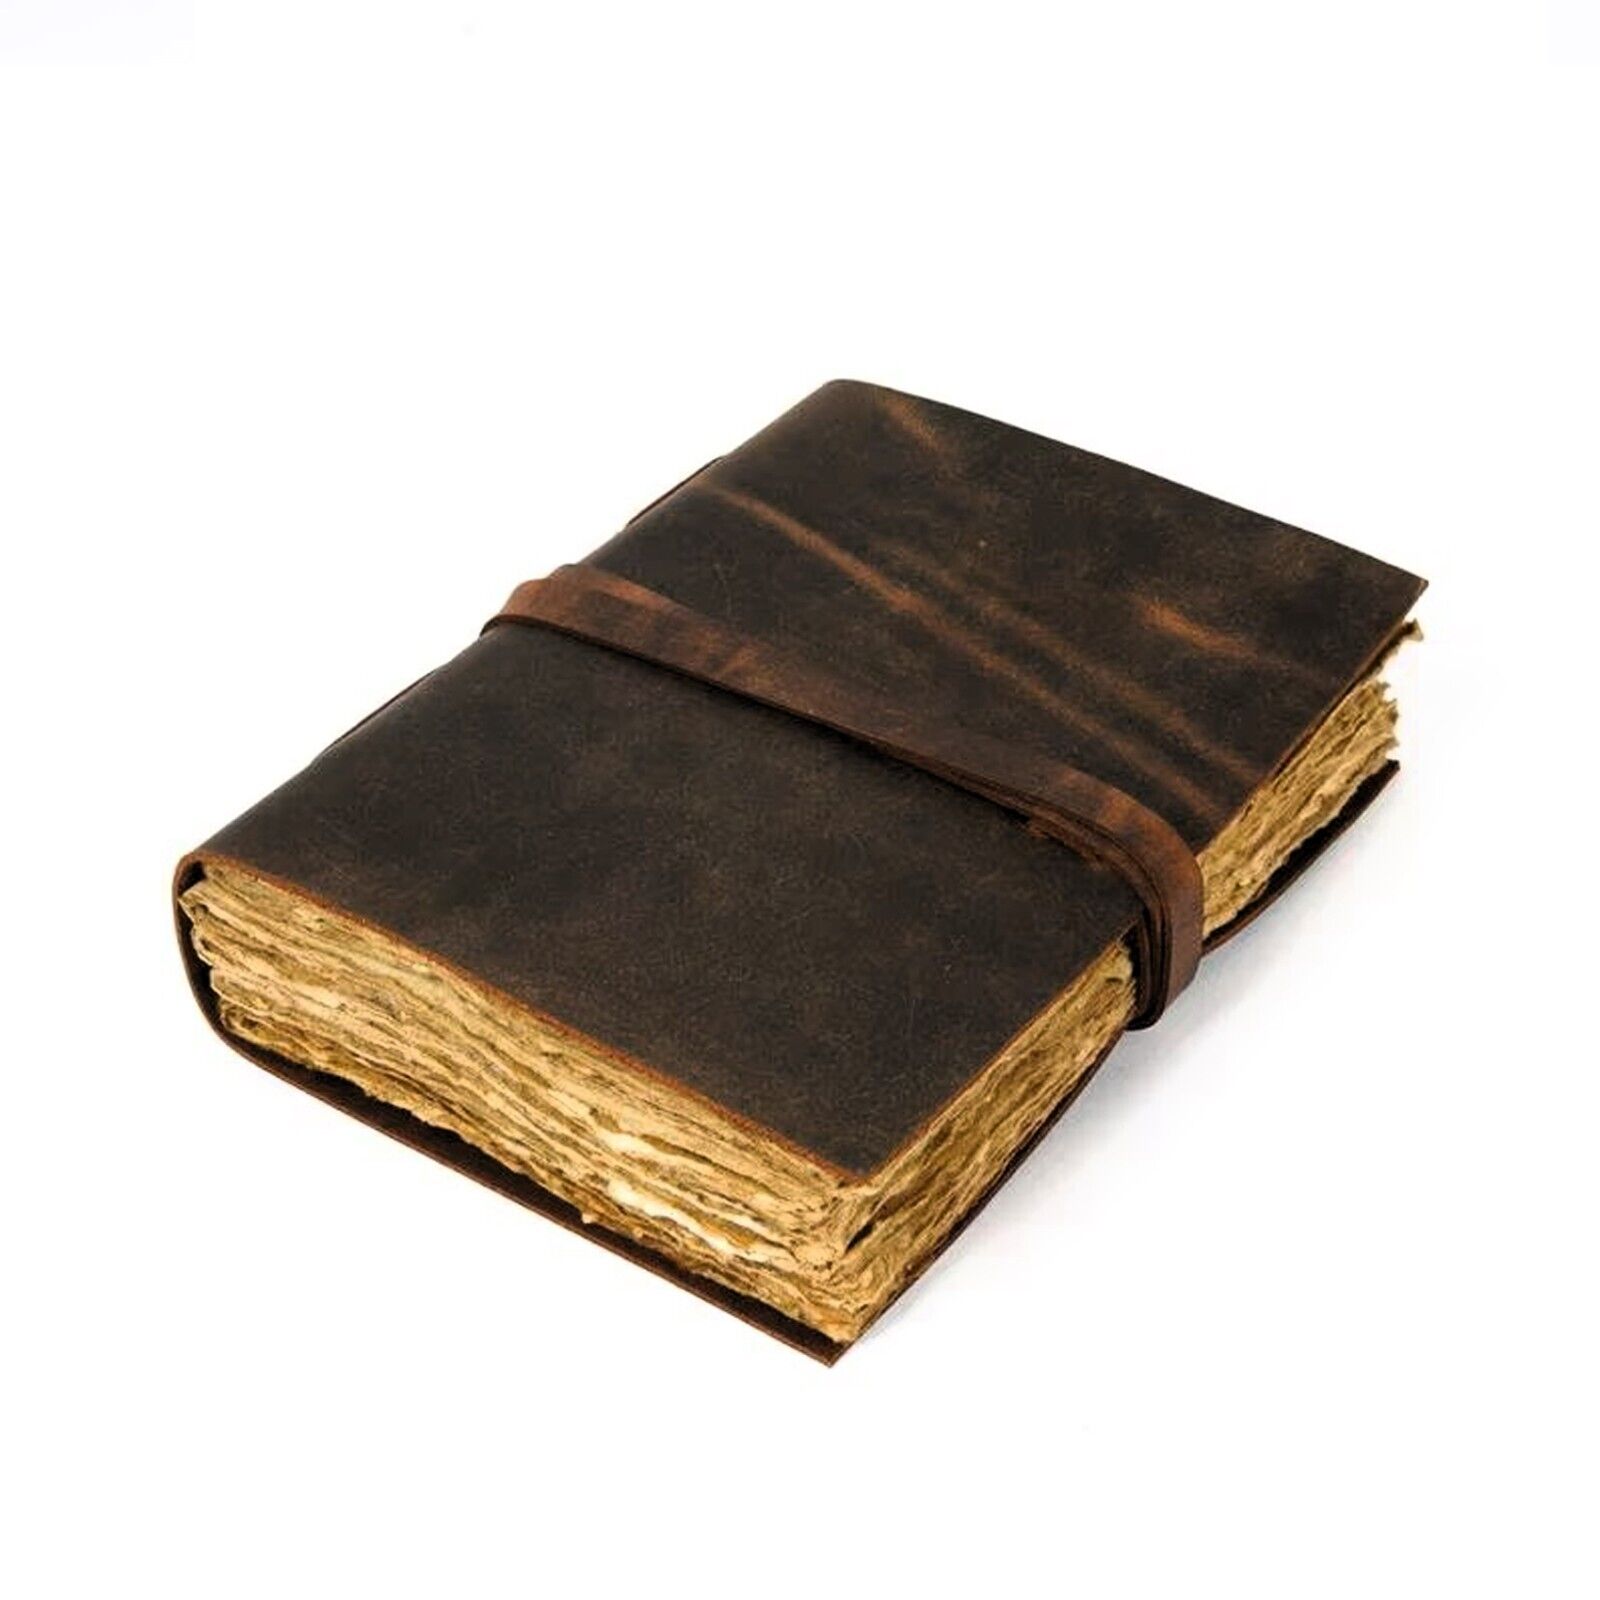 Vintage Leather Journal Leather Dairy Notebook Leather Sketchbook Writing Book.